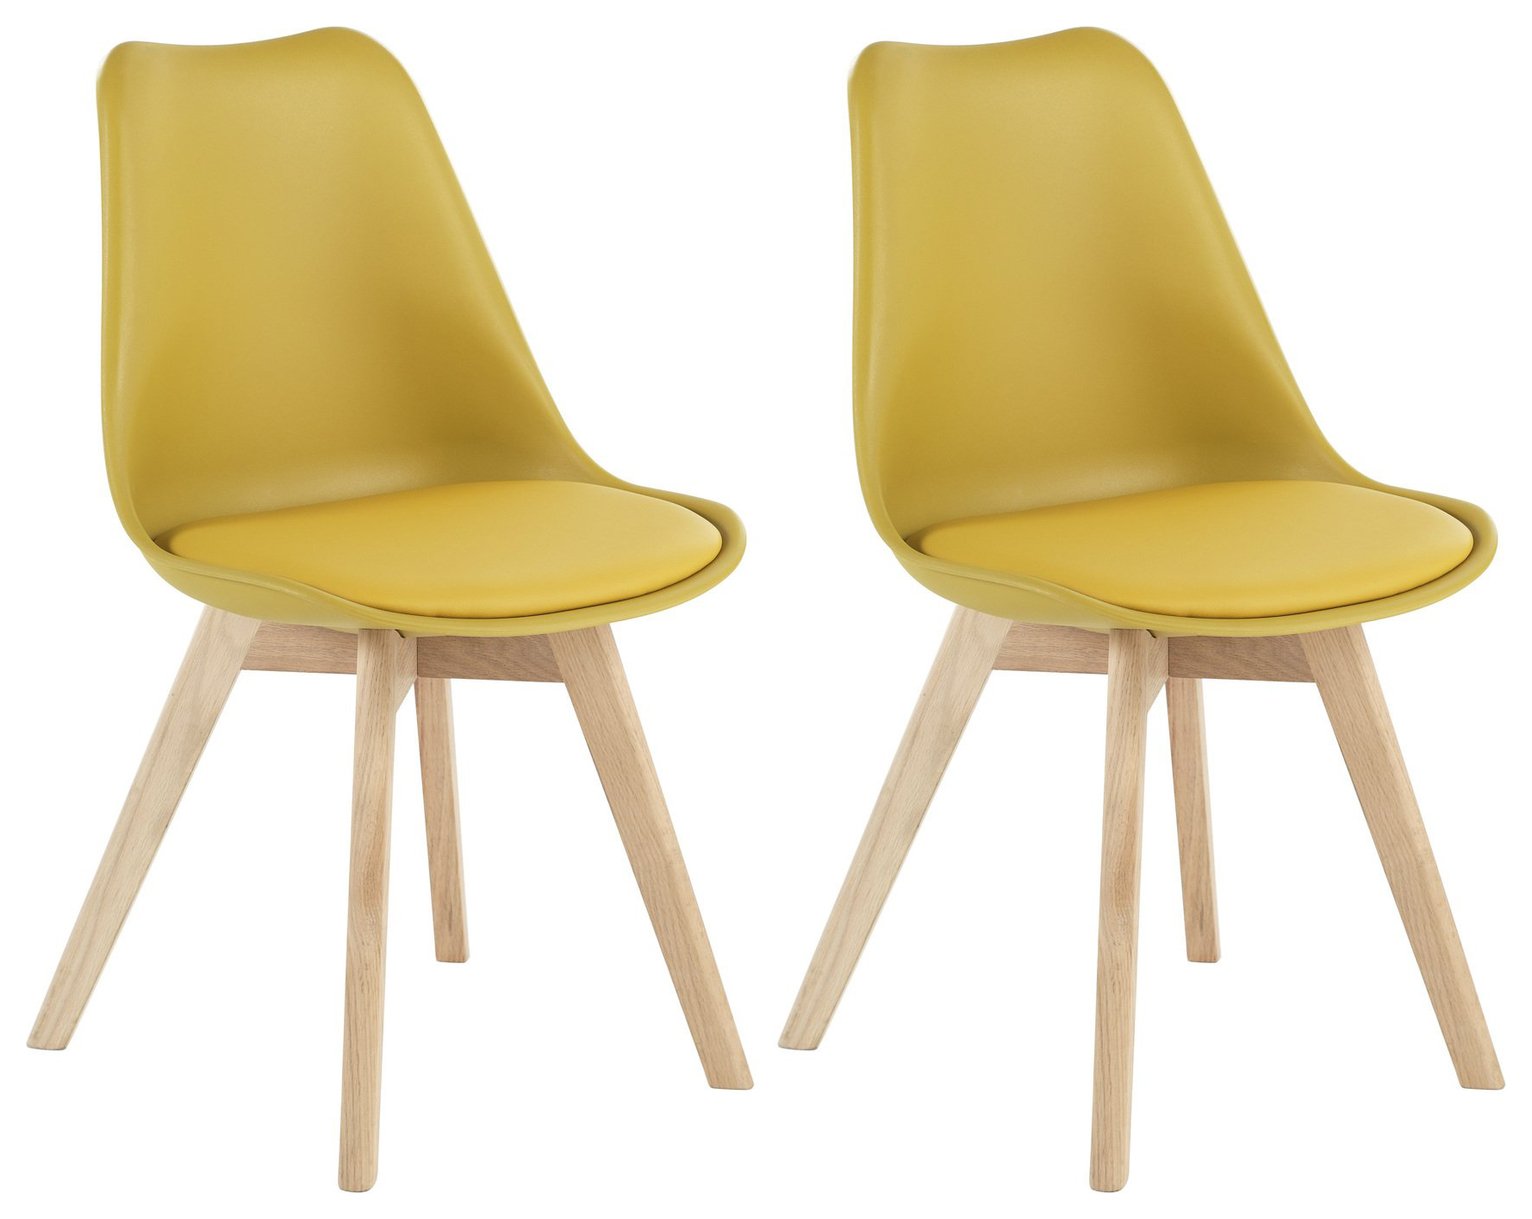 Review of Habitat Jerry Pair of Dining Chairs - Mustard